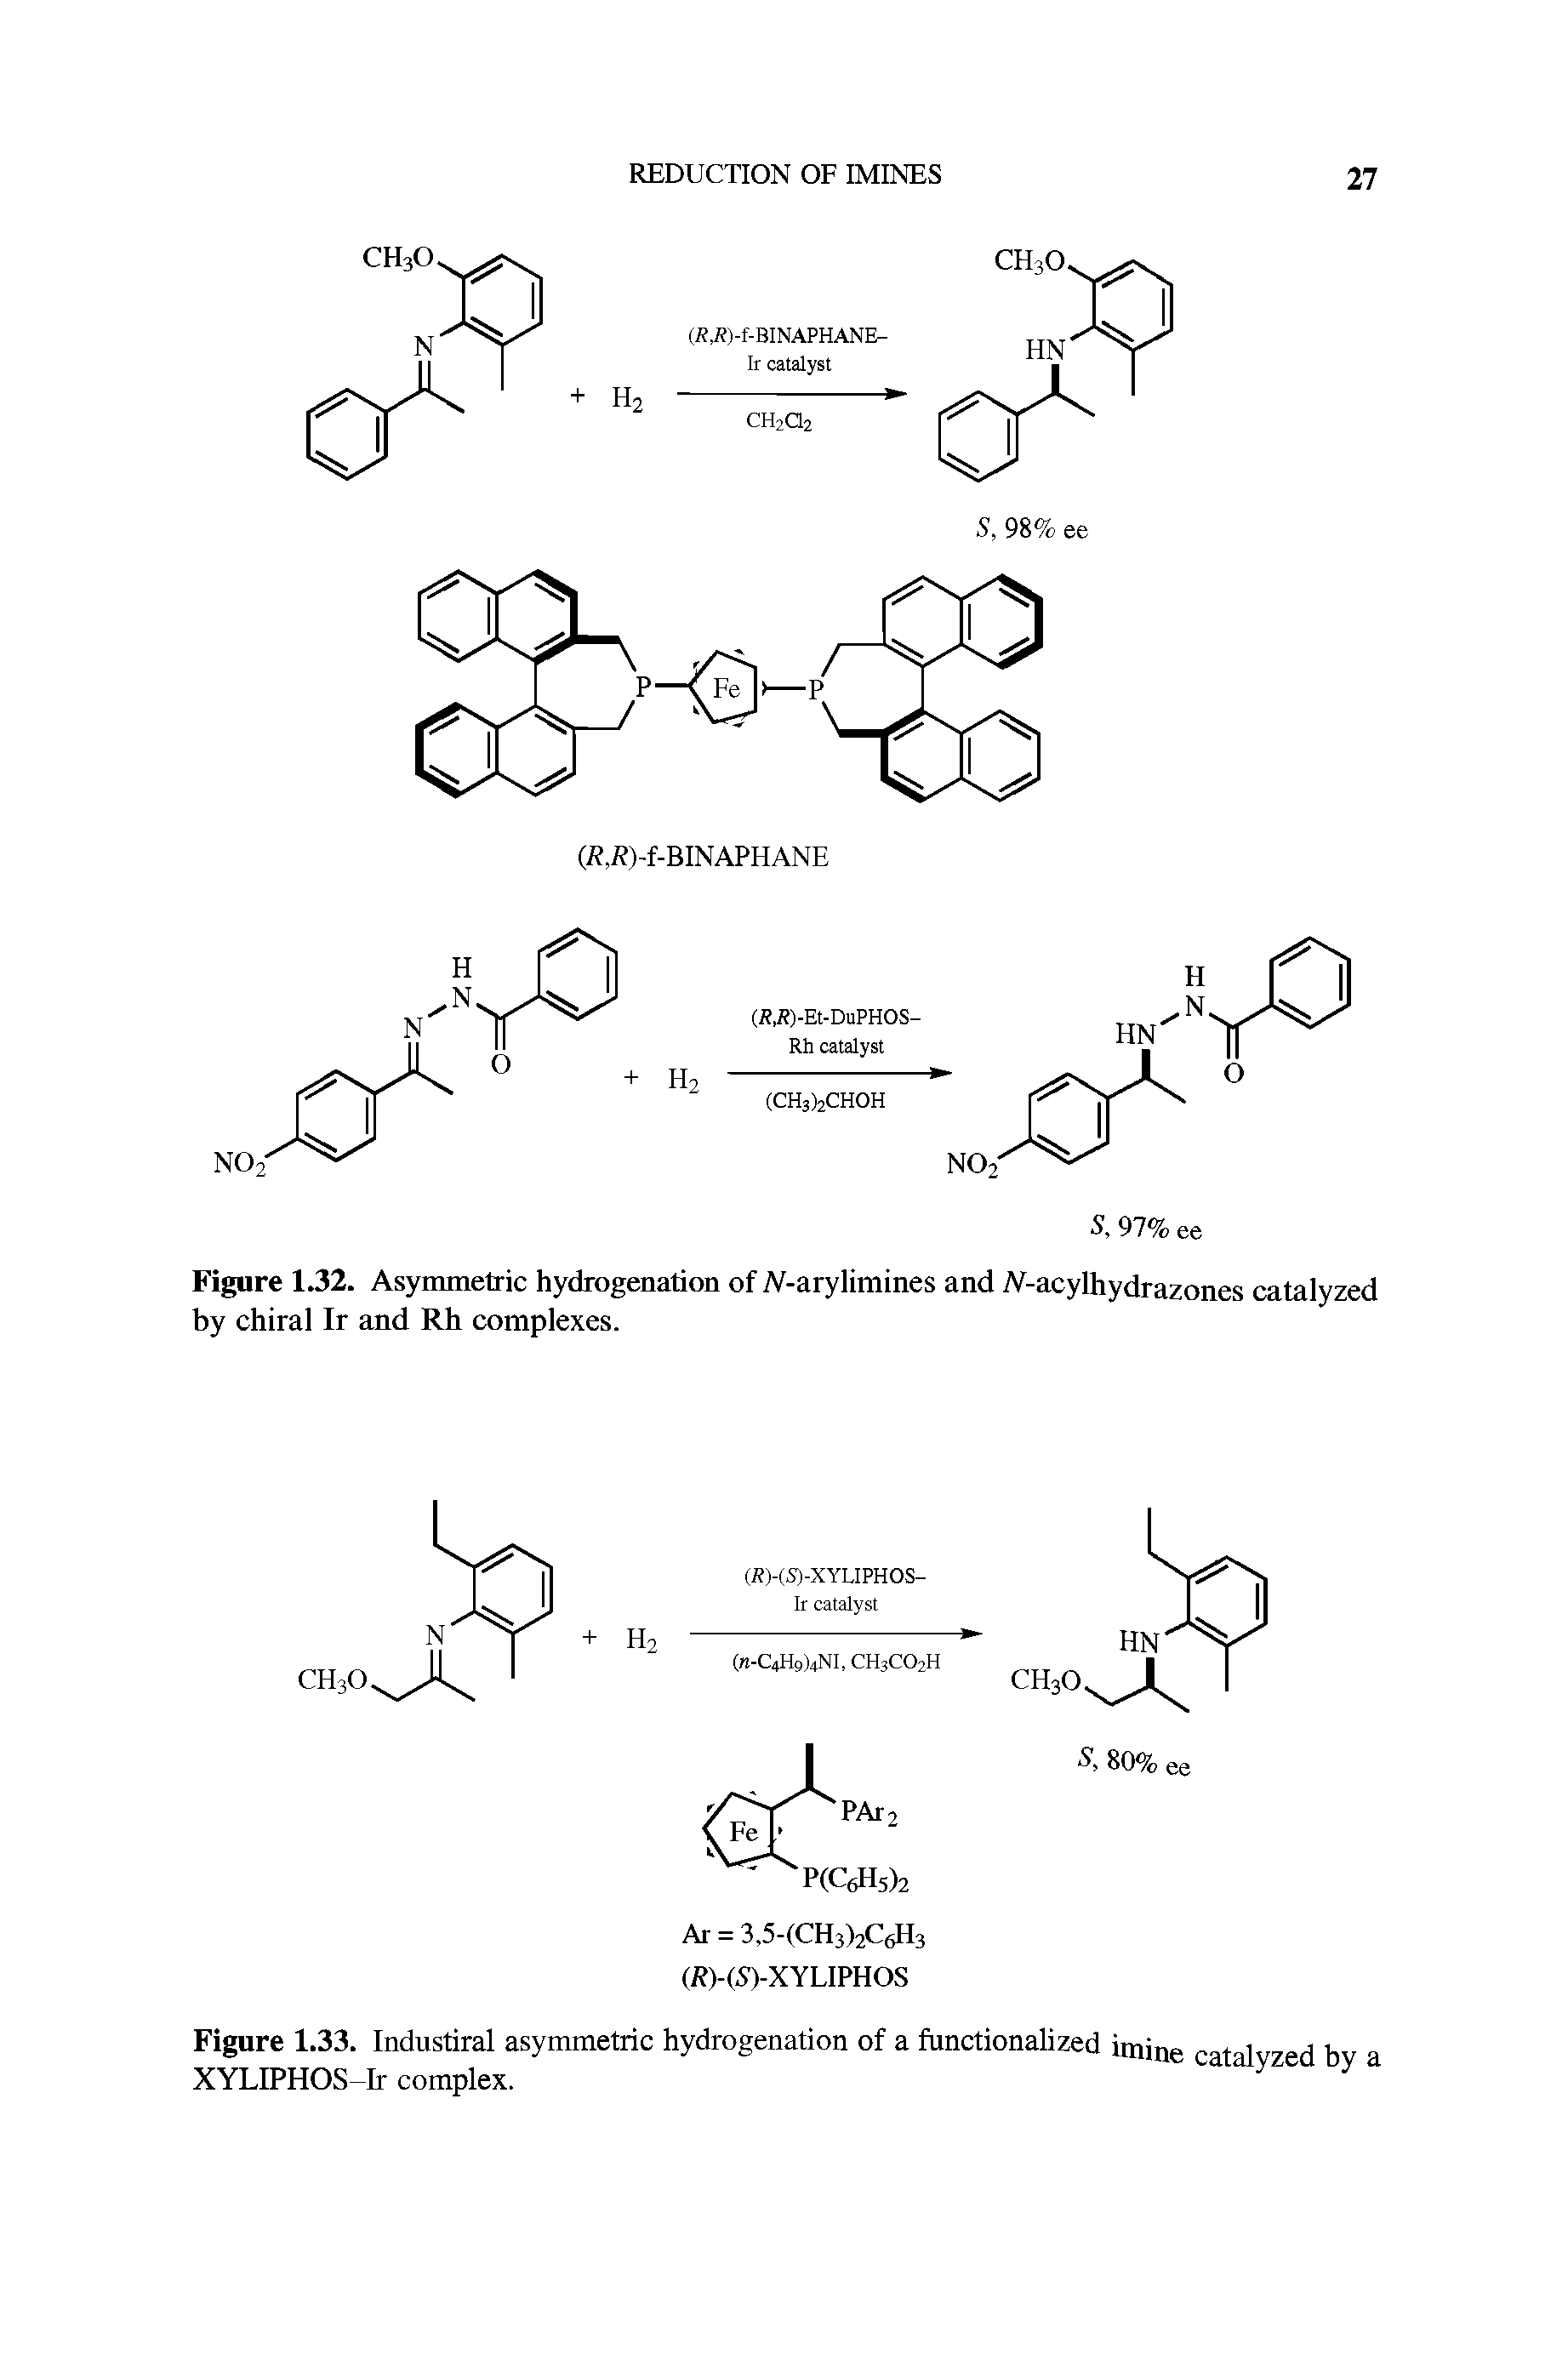 Figure 1.33. Industiral asymmetric hydrogenation of a functionalized imine catalyzed by XYLIPHOS-Ir complex.